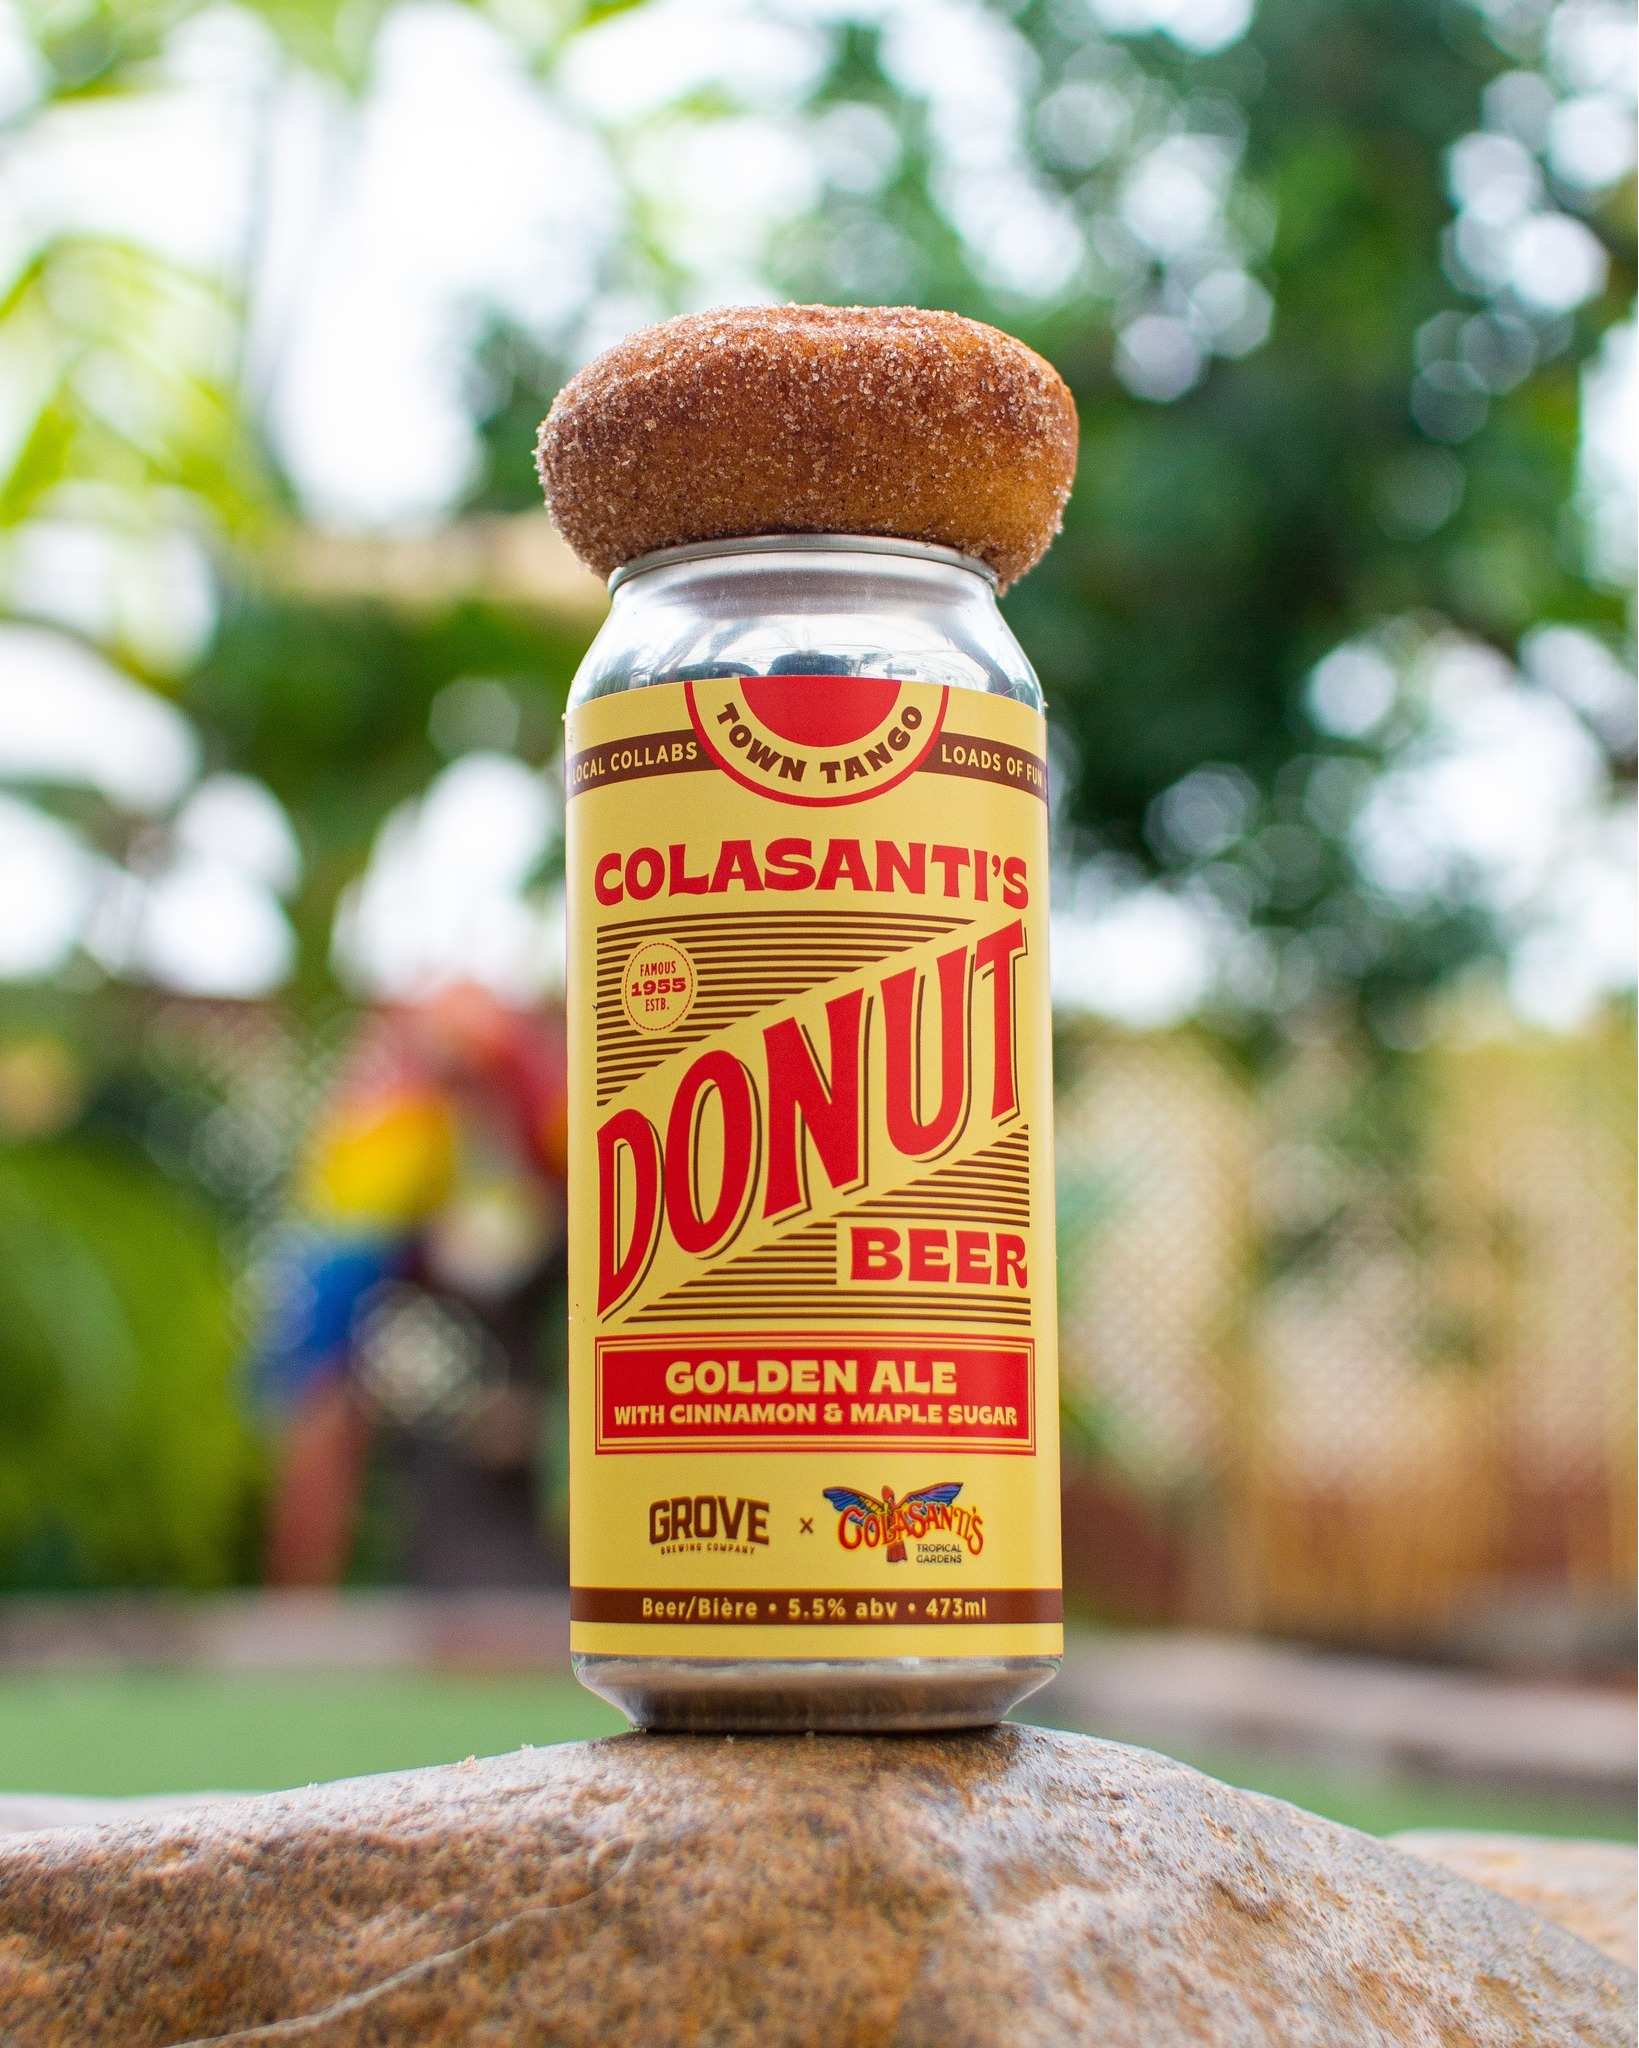 Colasanti's Donut Beer by The Grove Brewing Company in Kingsville, Ontario.